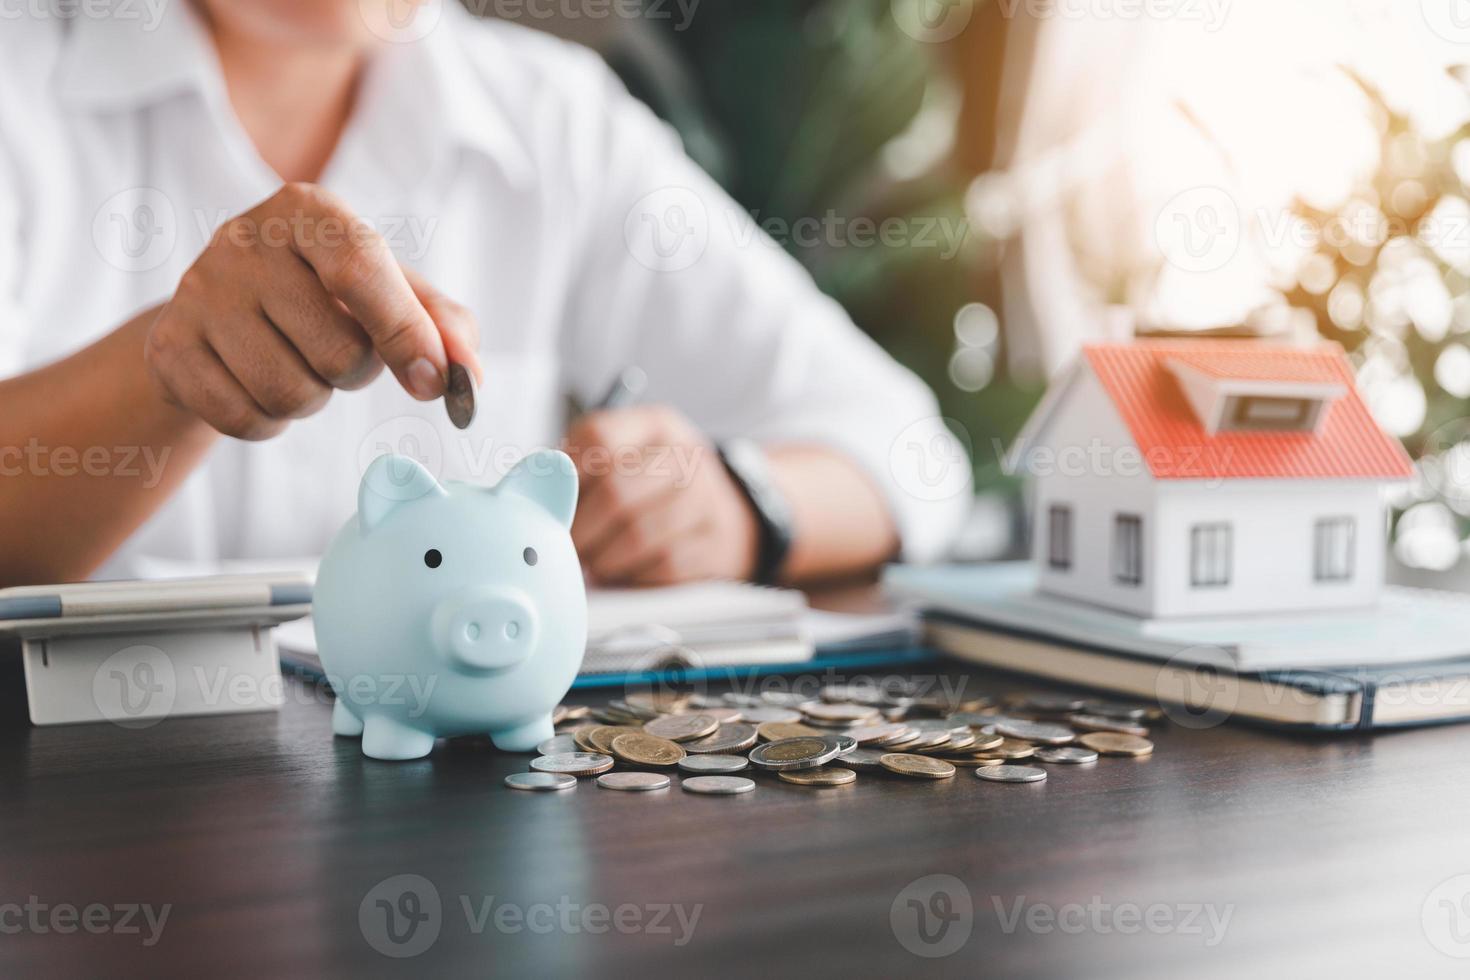 Saving investment home with loan finance money business concept. Investment banking finance for residential real estate business. Stack coins with model house for investment loans. Cash for taxes. photo